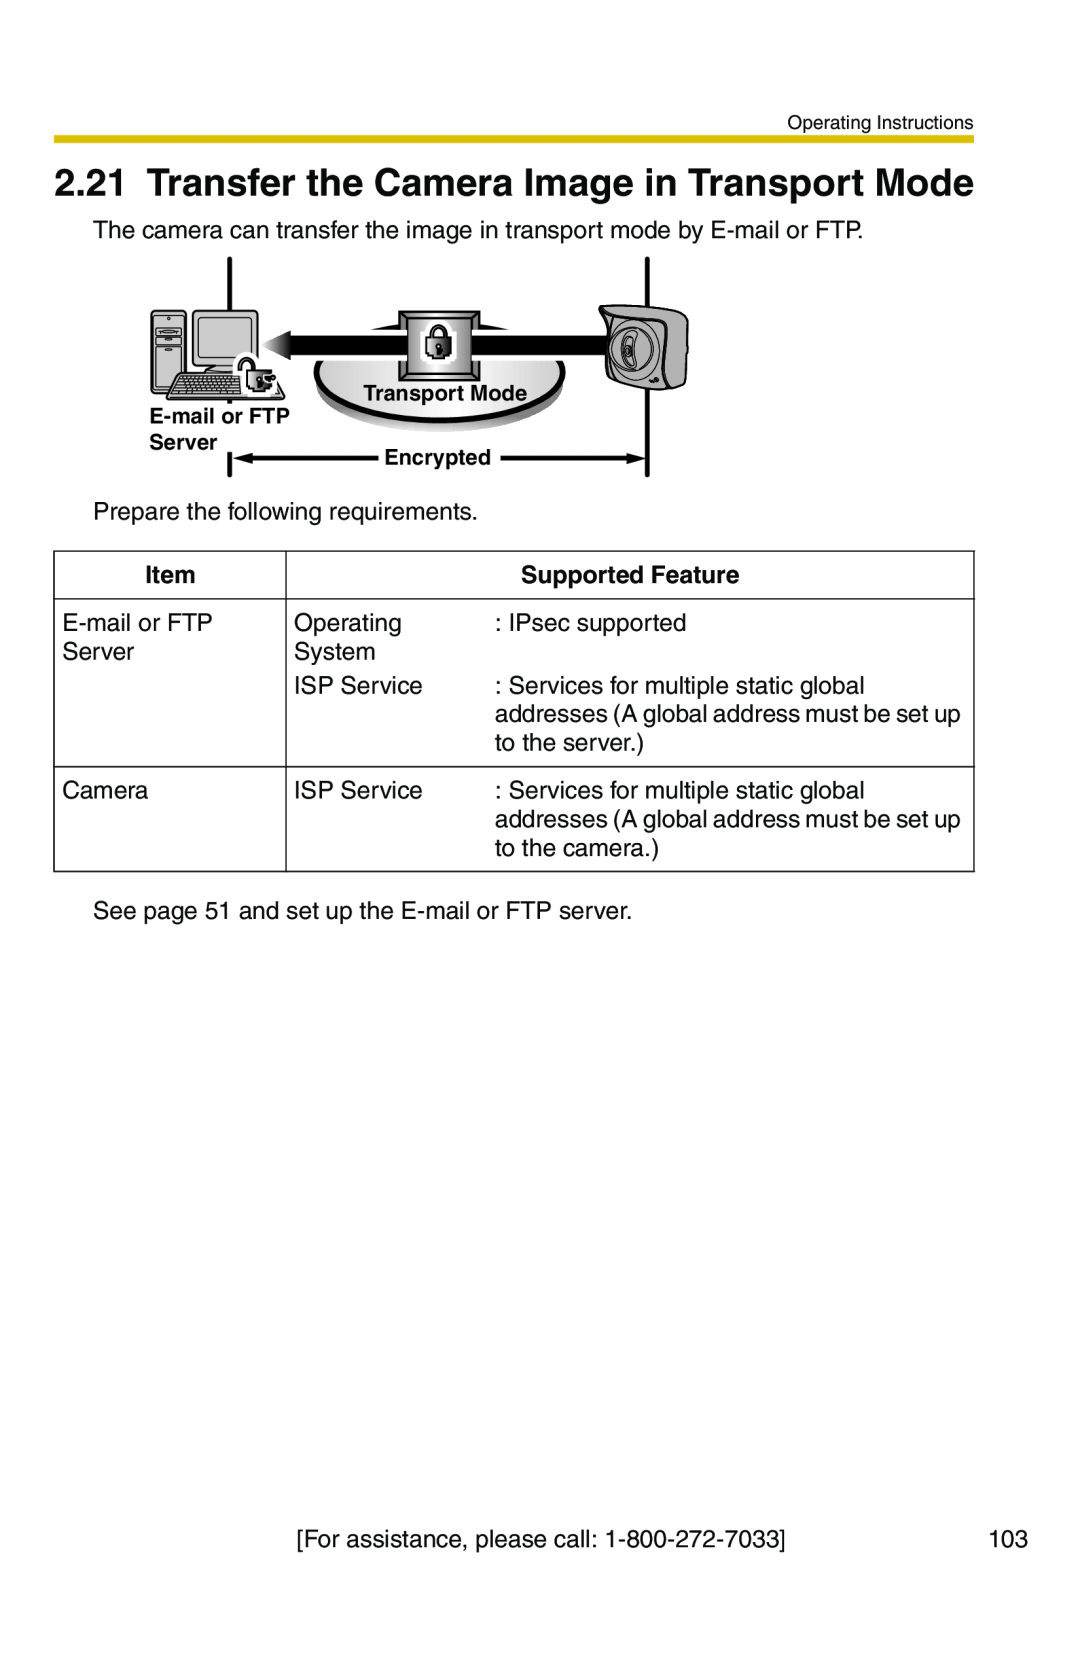 Panasonic BB-HCM331A Transfer the Camera Image in Transport Mode, Transport Mode E-mail or FTP Server Encrypted 